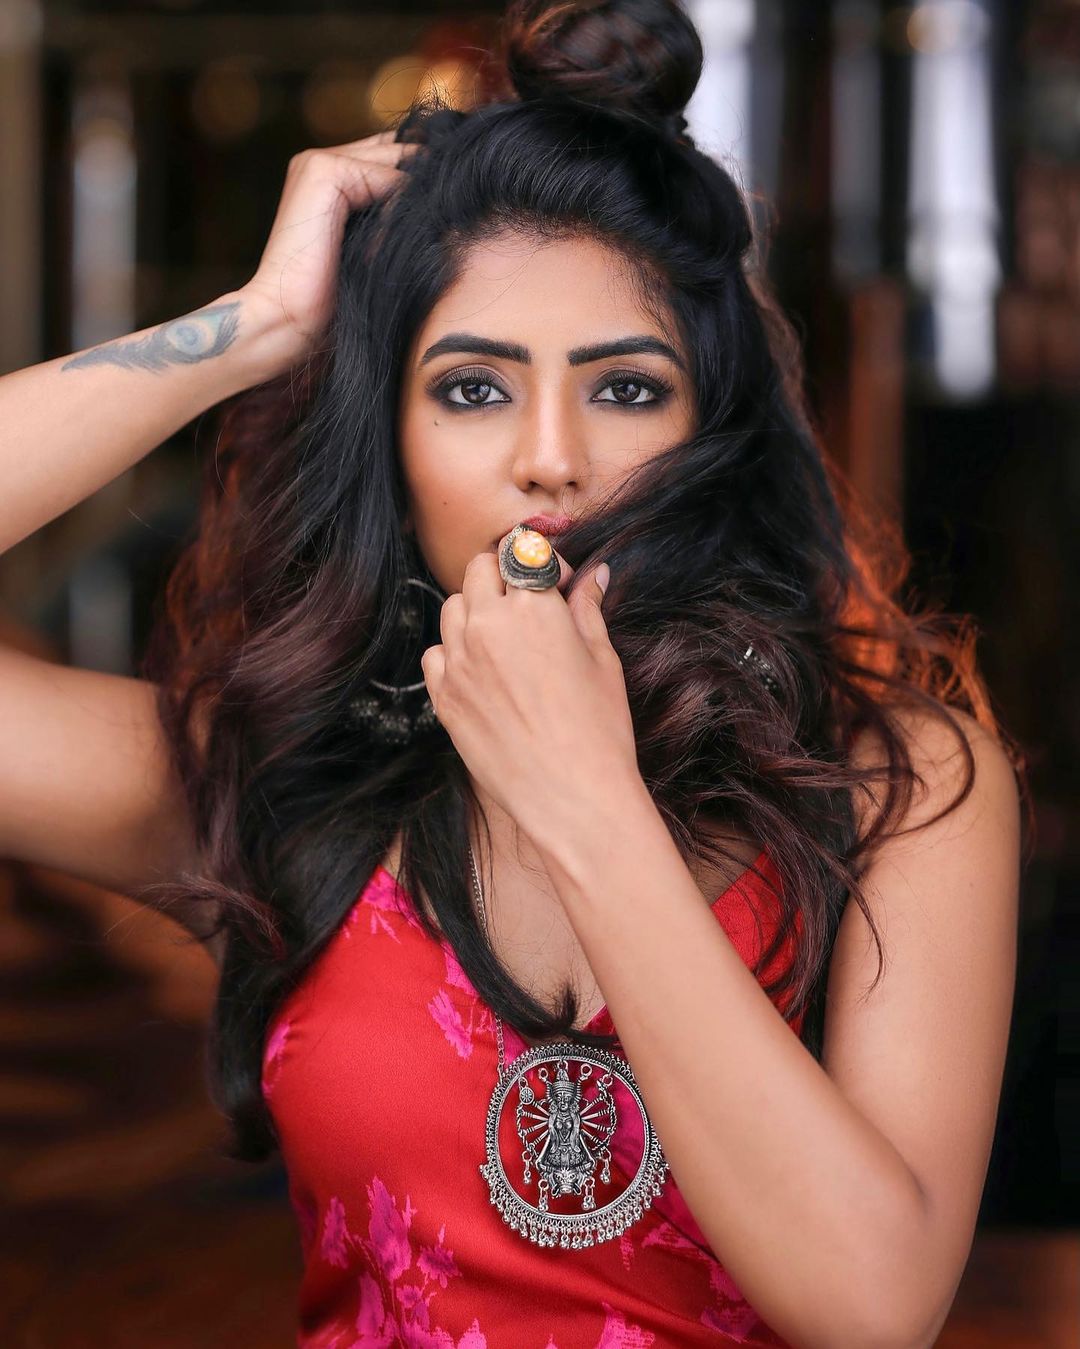 Telugu heroine eesha rebba wonderful images-Eesha Rebba, Eesha Rebba Hot, Eesharebba, Telugueesha Photos,Spicy Hot Pics,Images,High Resolution WallPapers Download